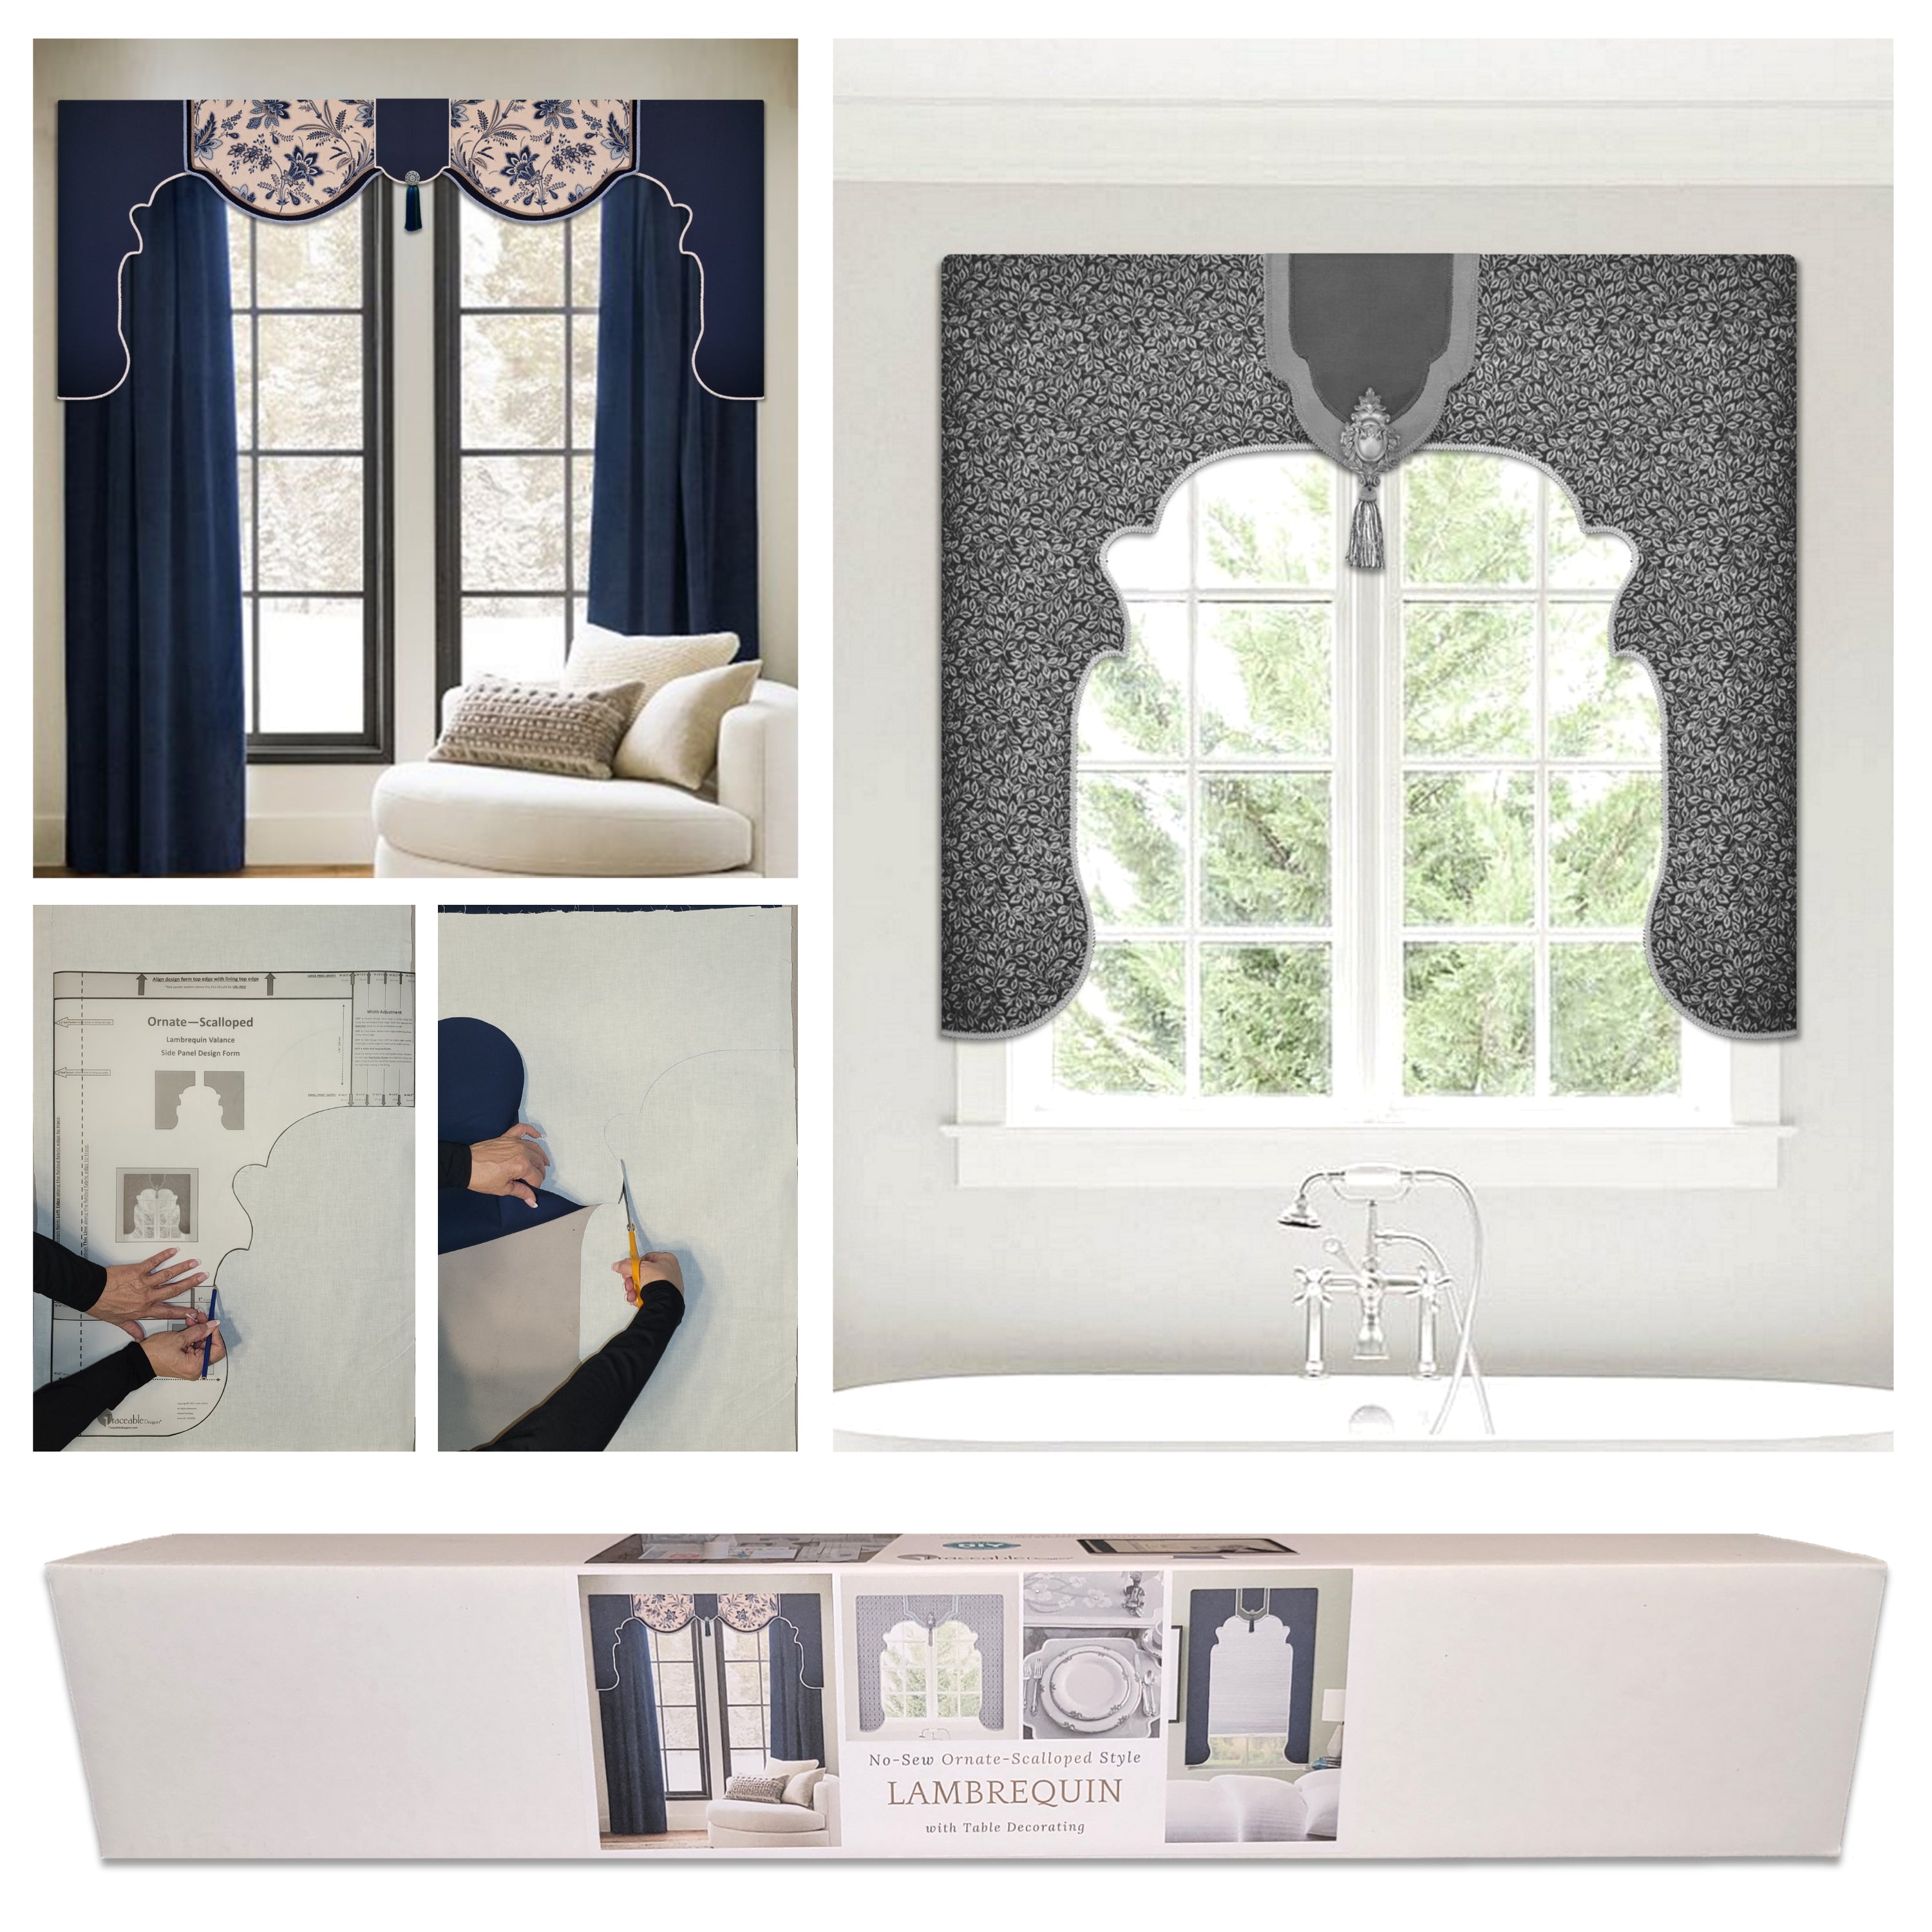 Traceable Designer ornate scalloped lambrequin valance kit includes traceable no-sew valance design forms used to make custom valances without sewing! Fit all window sizes and bay windows.